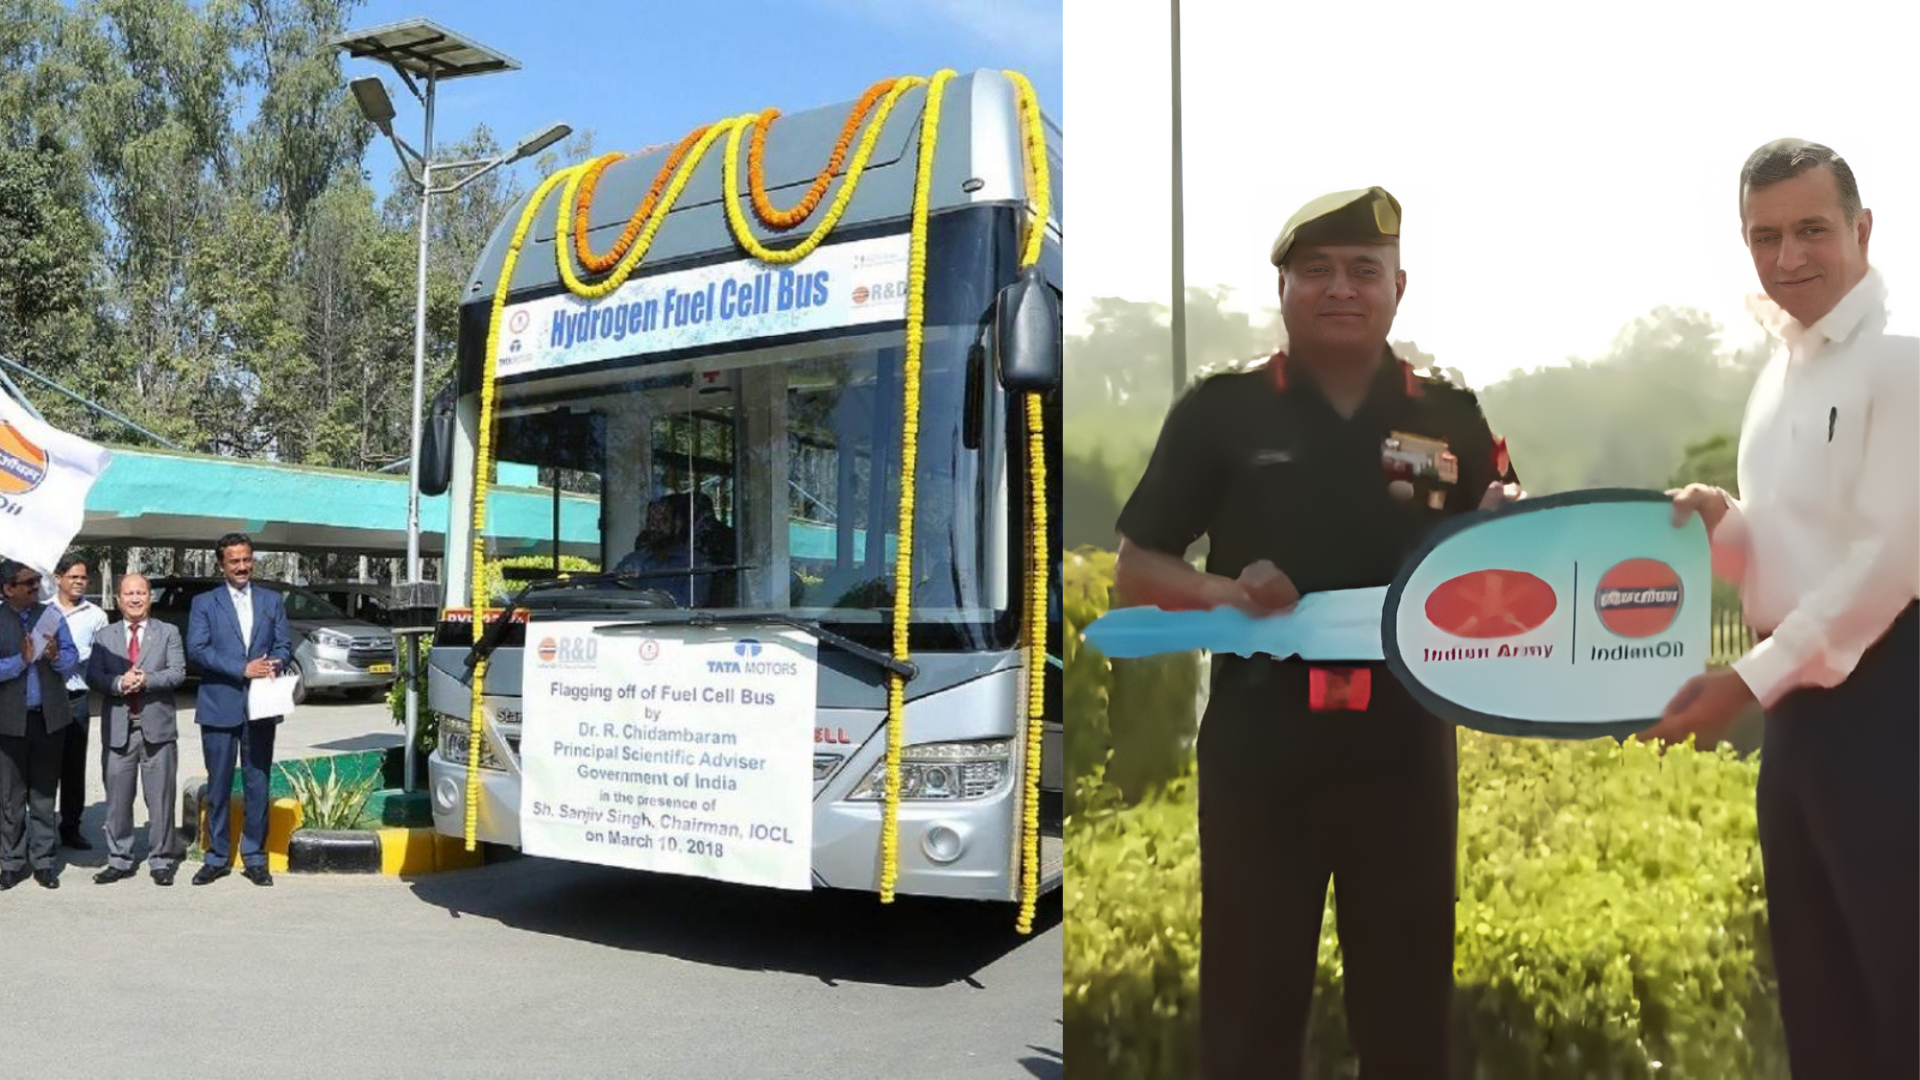 Army Chief General Pande Accepts IOC’s Hydrogen Fuel Cell Bus For Testing